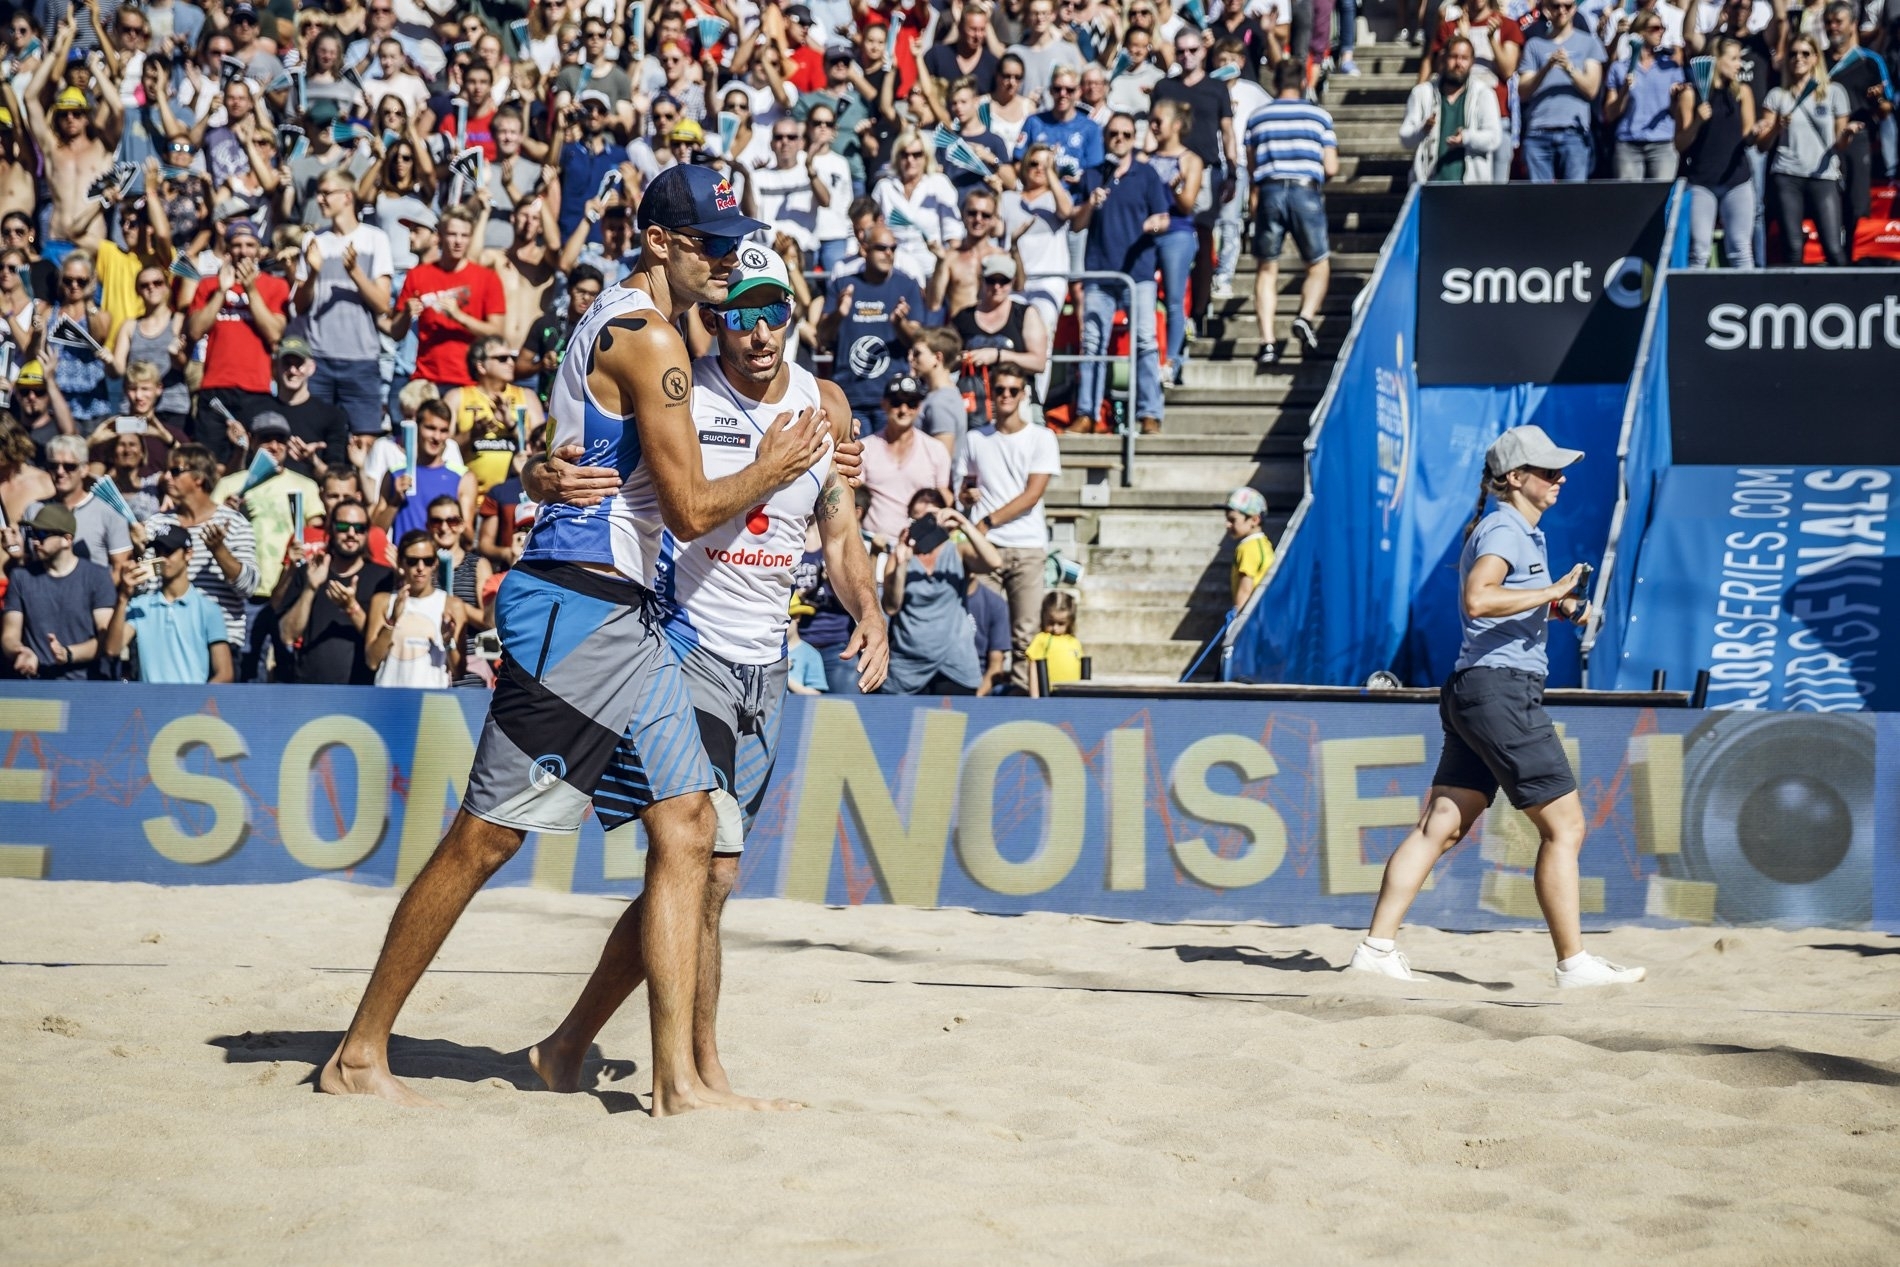 Florida stars Lucena and Dalhausser are the top-seeded team for the Fort Lauderdale Major